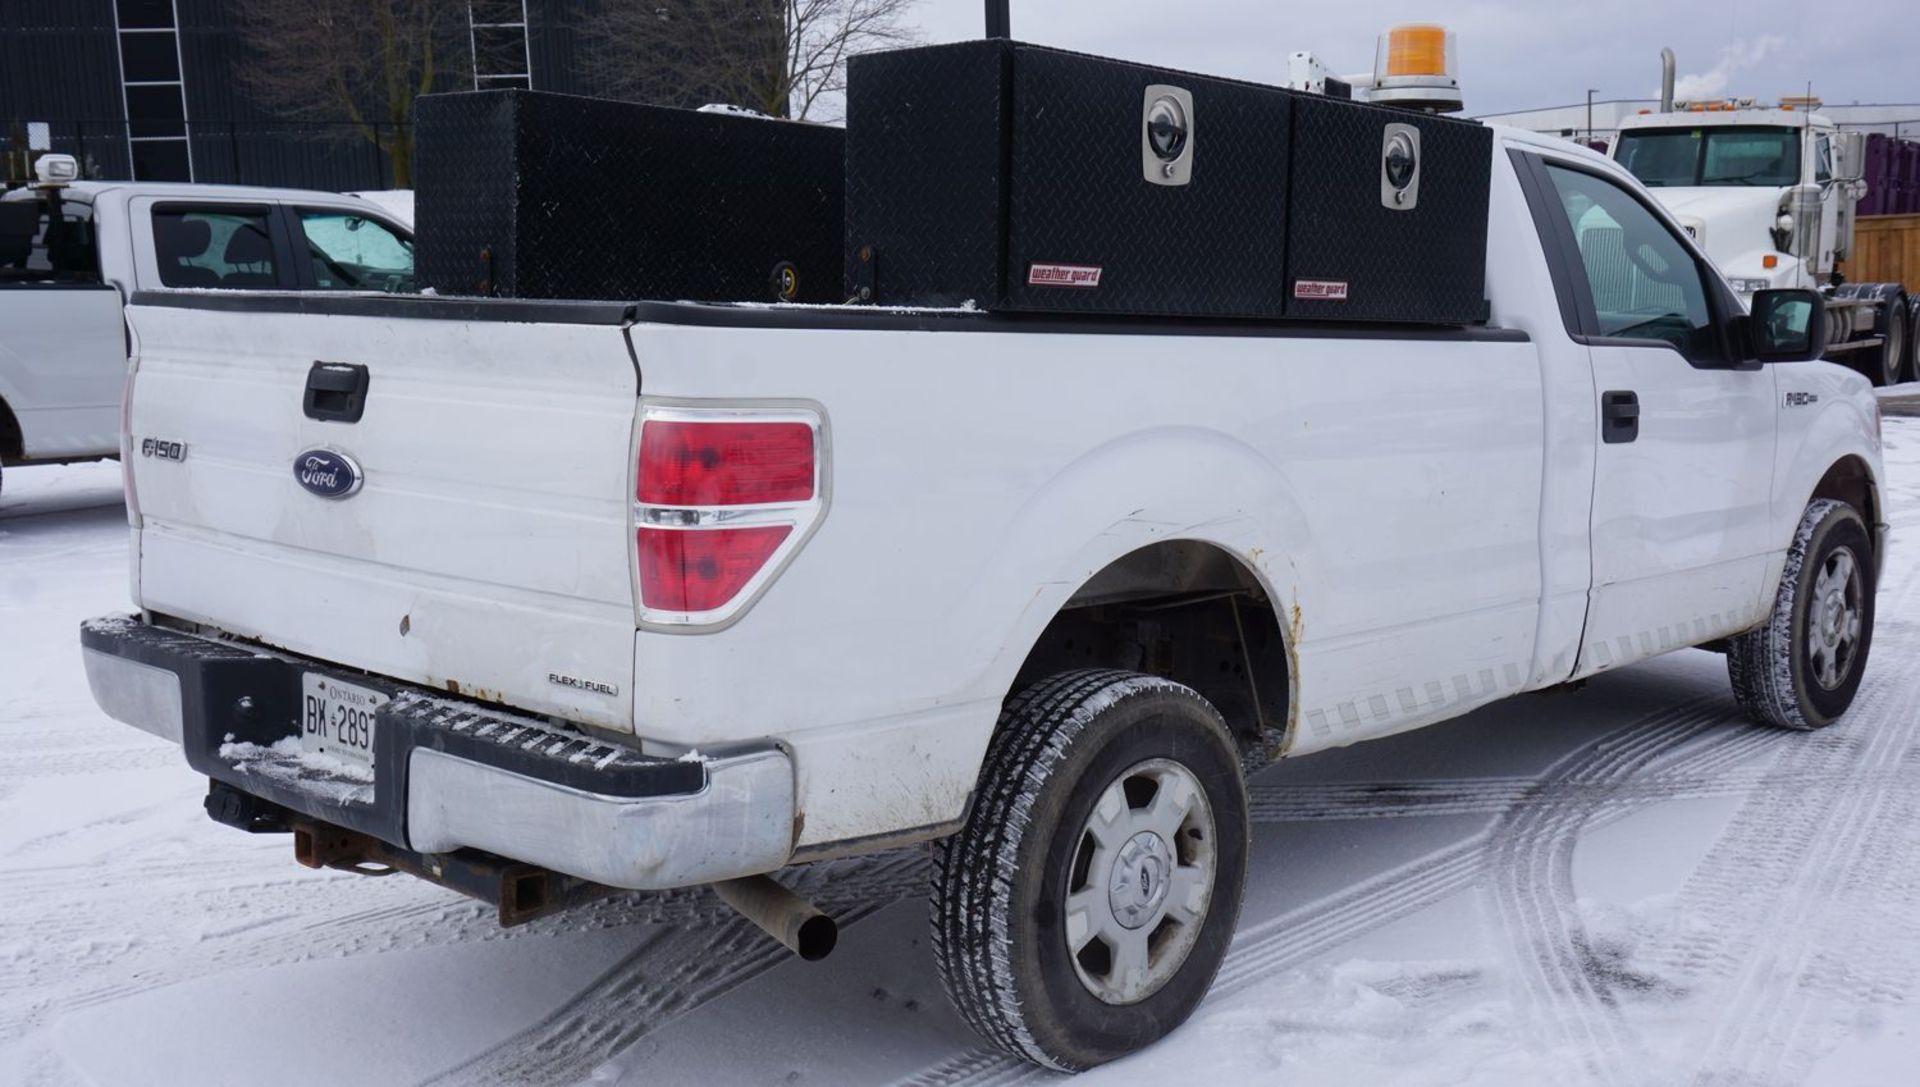 2014 FORD F150XL REG CAB 4X2 PICKUP W/ 5.0L V8 GAS ENGINE C/W (2) WEATHER GUARD HI-SIDE TOOL BOXES, - Image 5 of 11